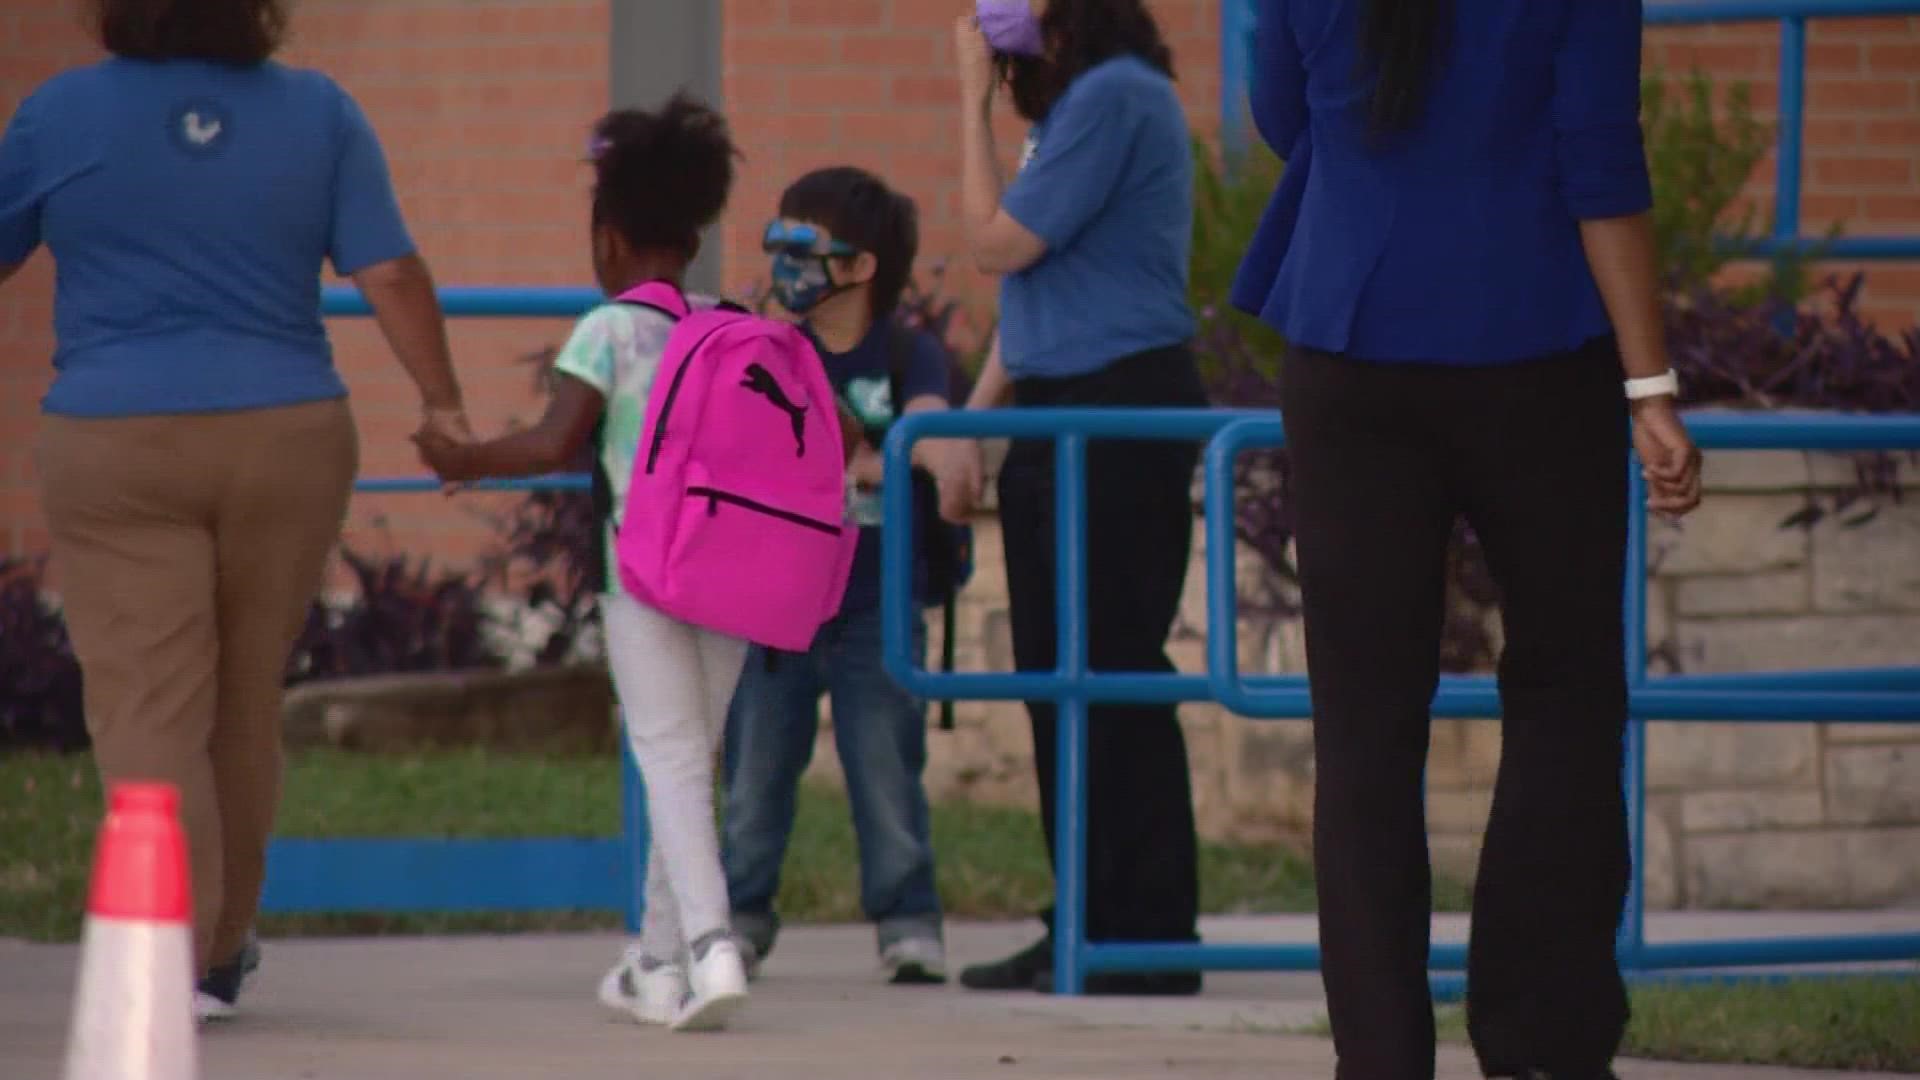 For a lot of parents, safety is a big concern as kids head back to school. This year, the district is implementing a standard response protocol.